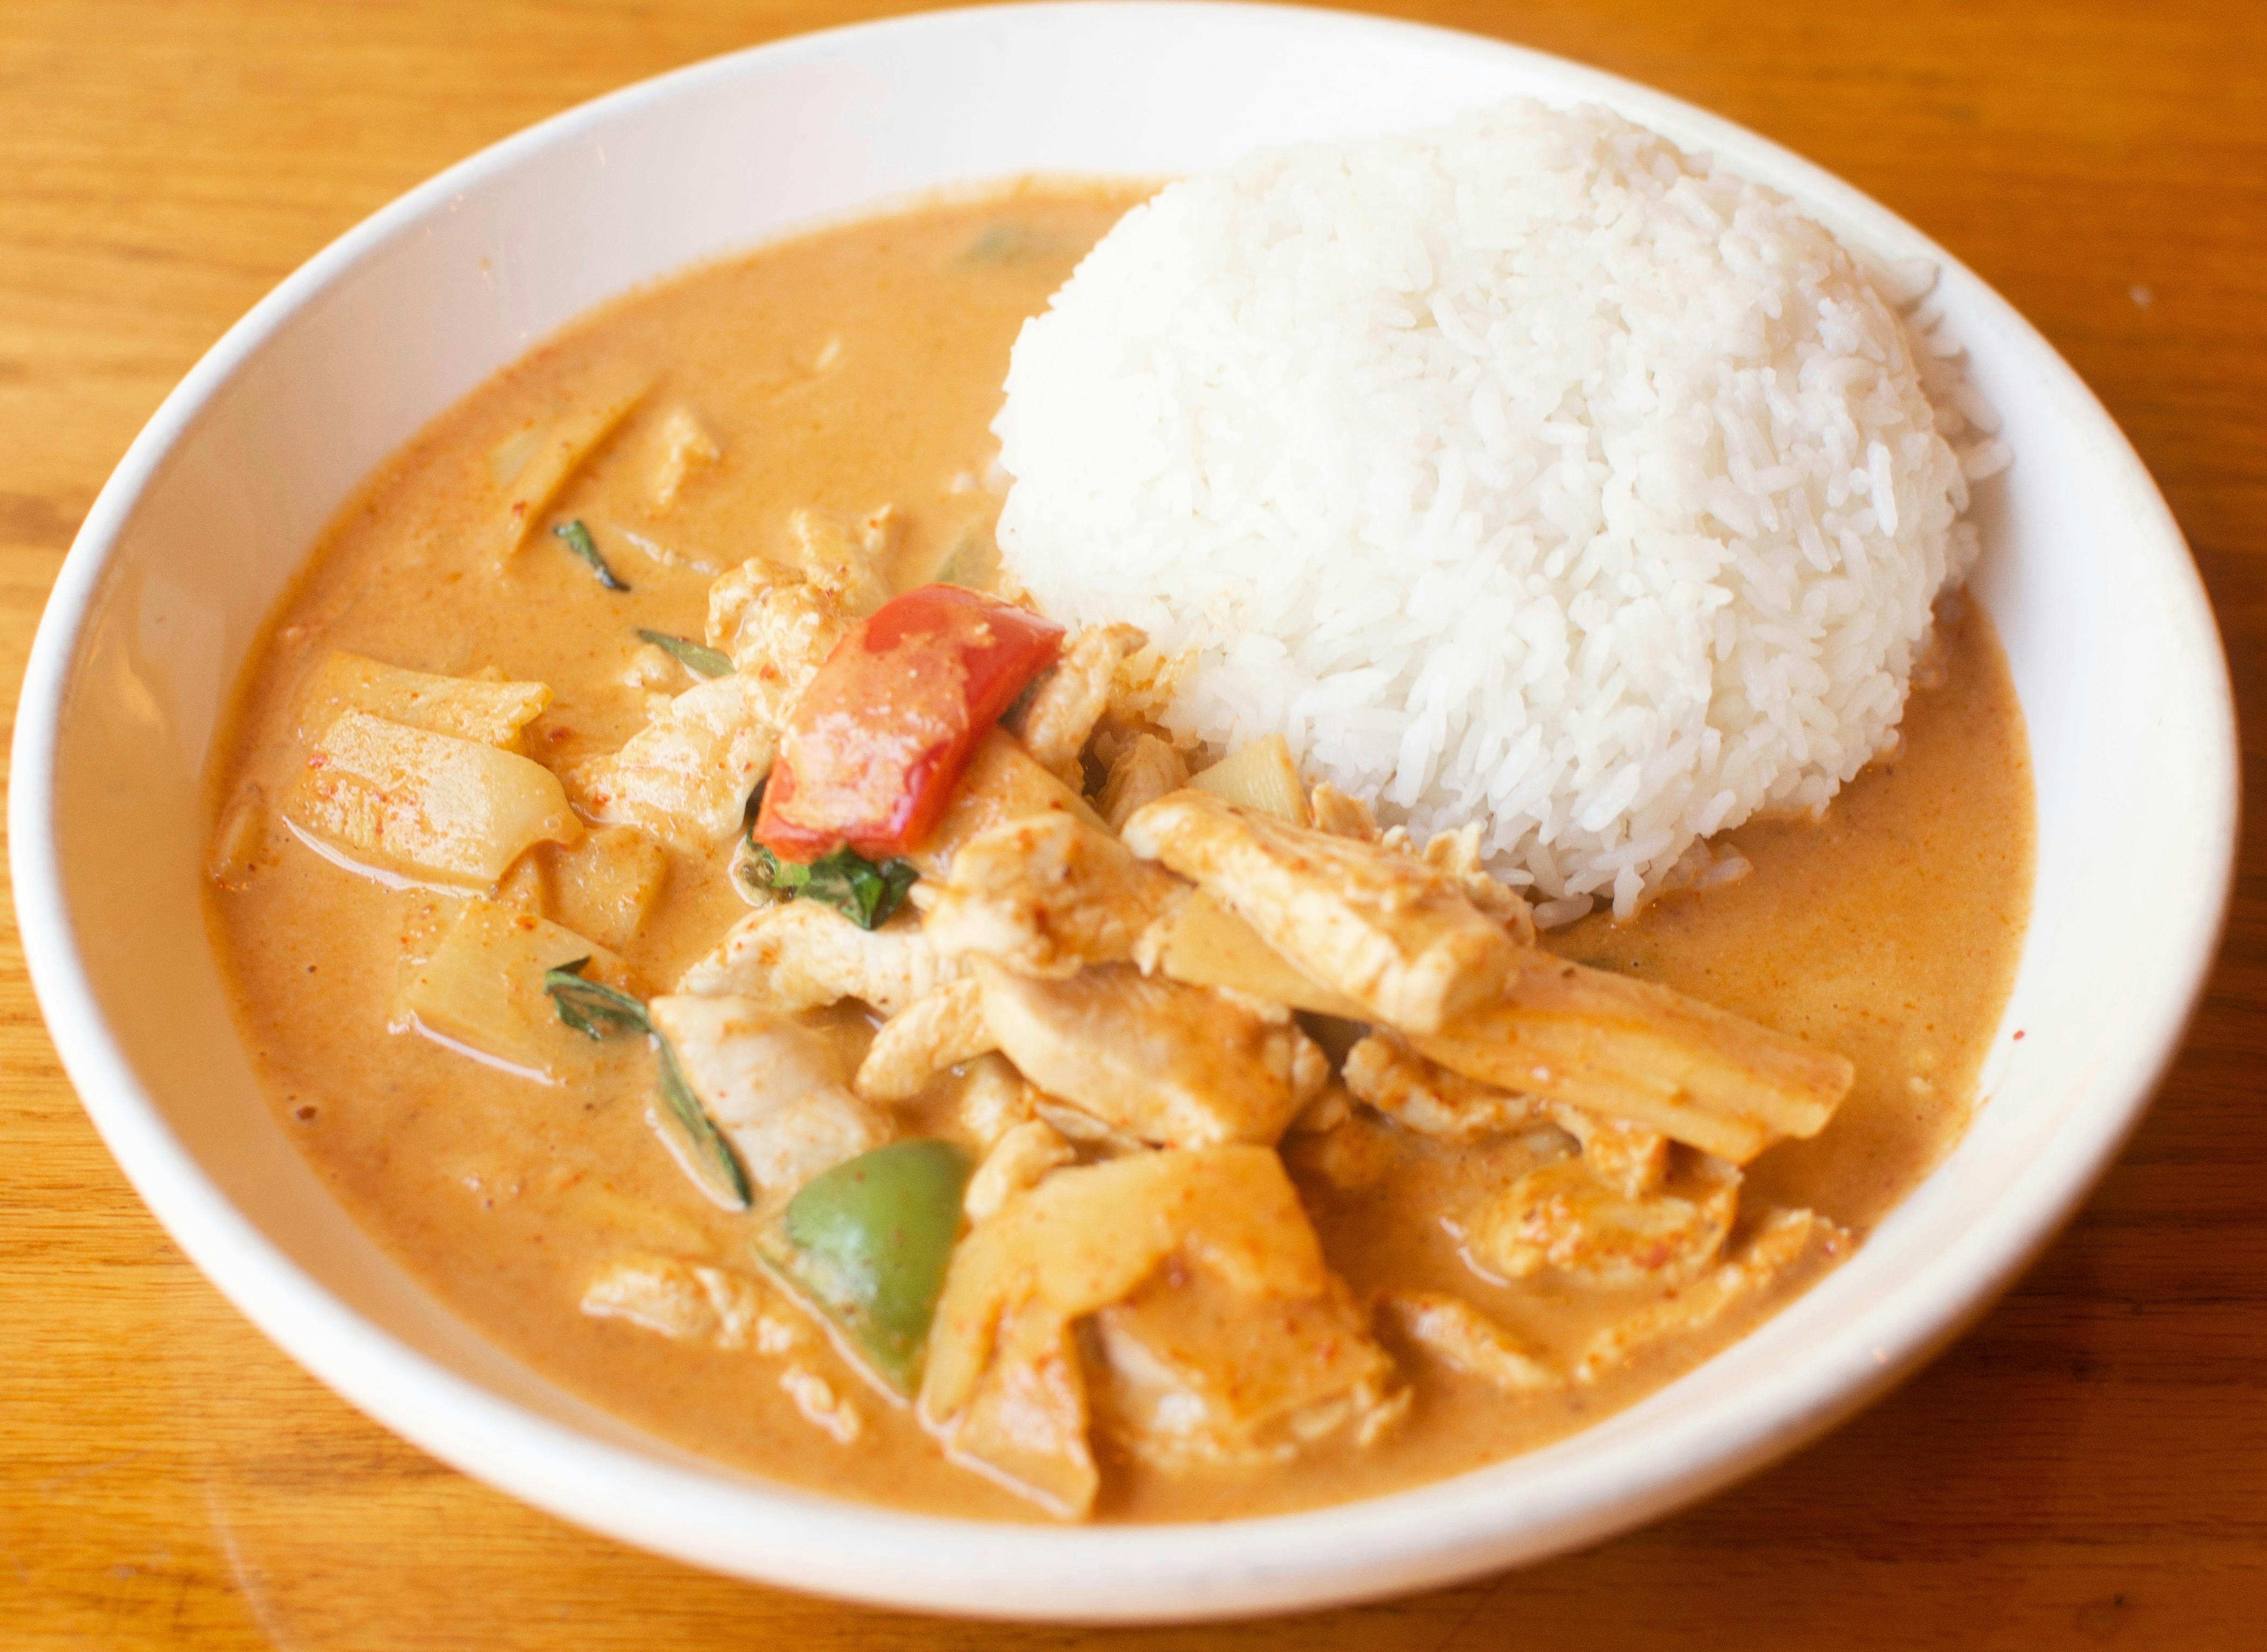 Red Thai Coconut Curry (GF) from Zen Zero in Lawrence, KS